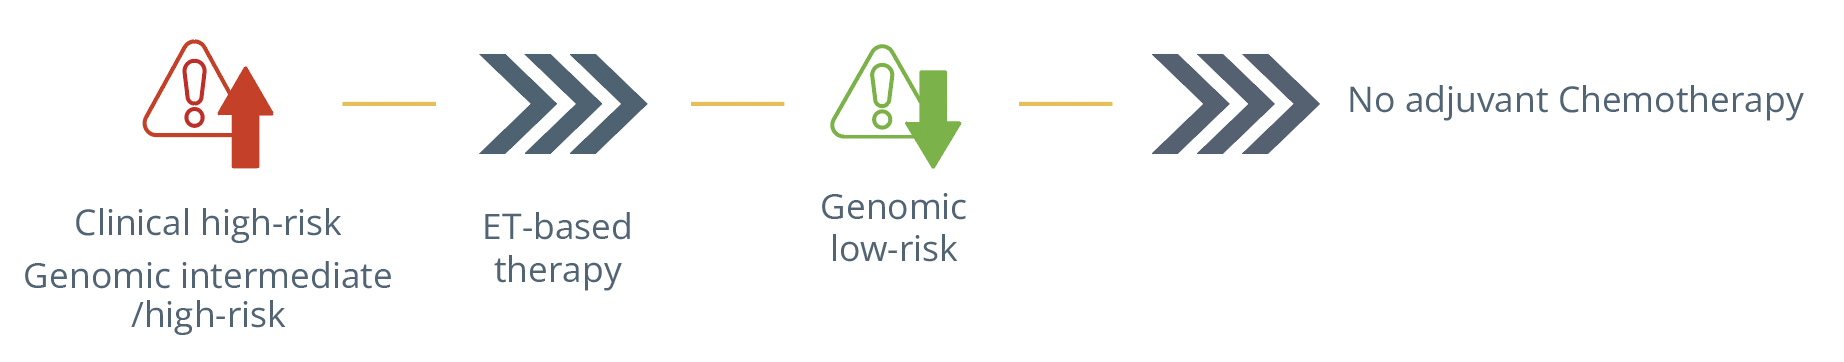 Clinically high risk and genomic intermediate to high risk patients should undergo endocrine therapy.